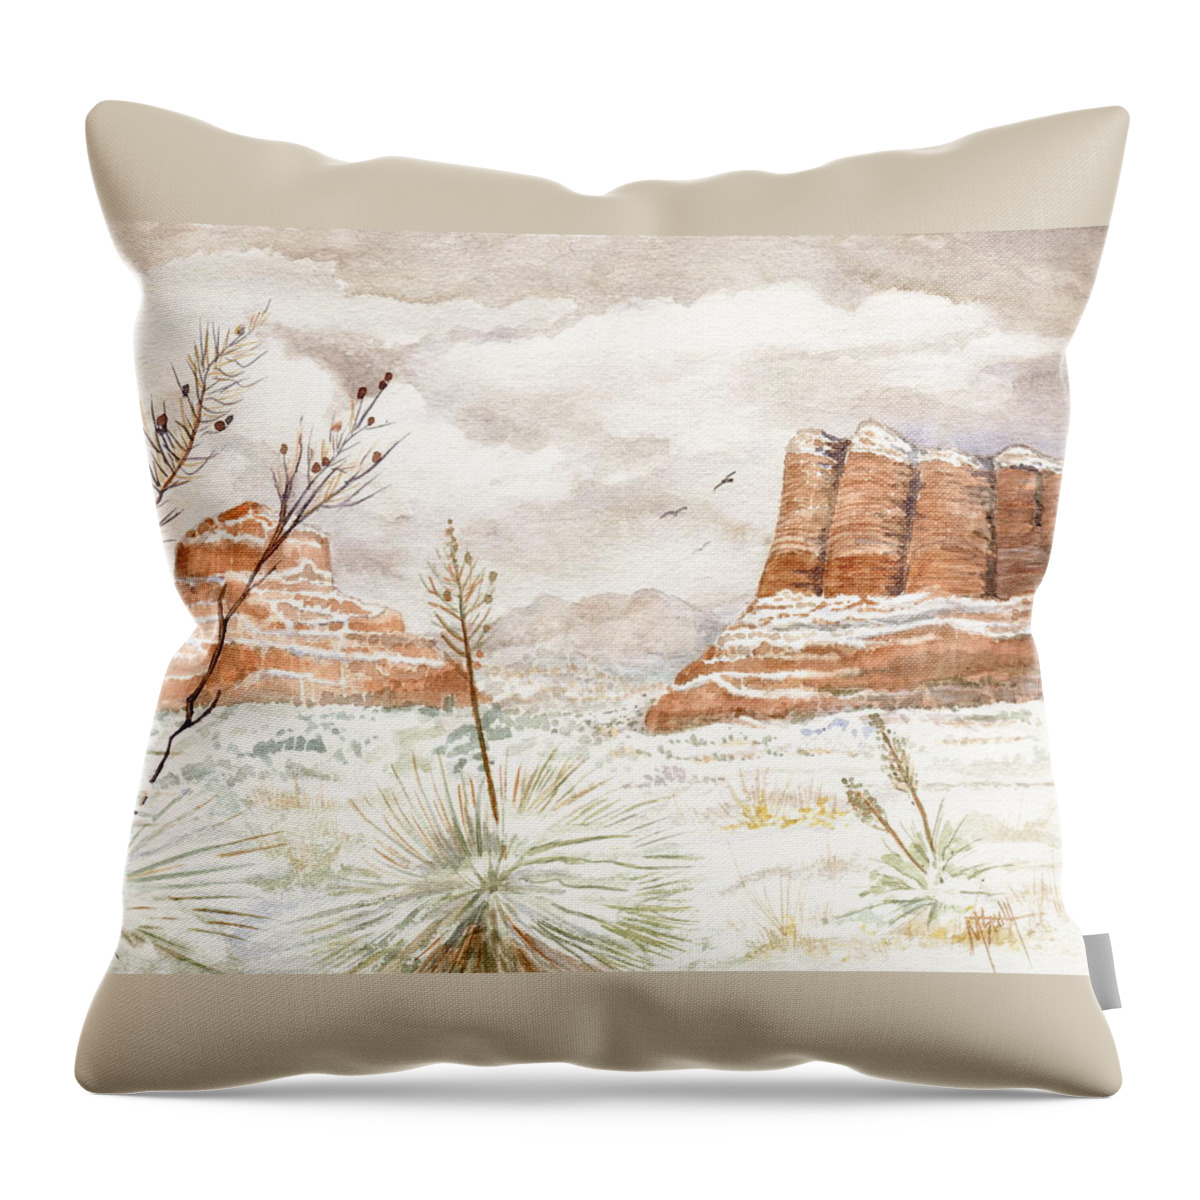 Bell Rock Throw Pillow featuring the painting Fresh Snow On Bell Rock by Marilyn Smith